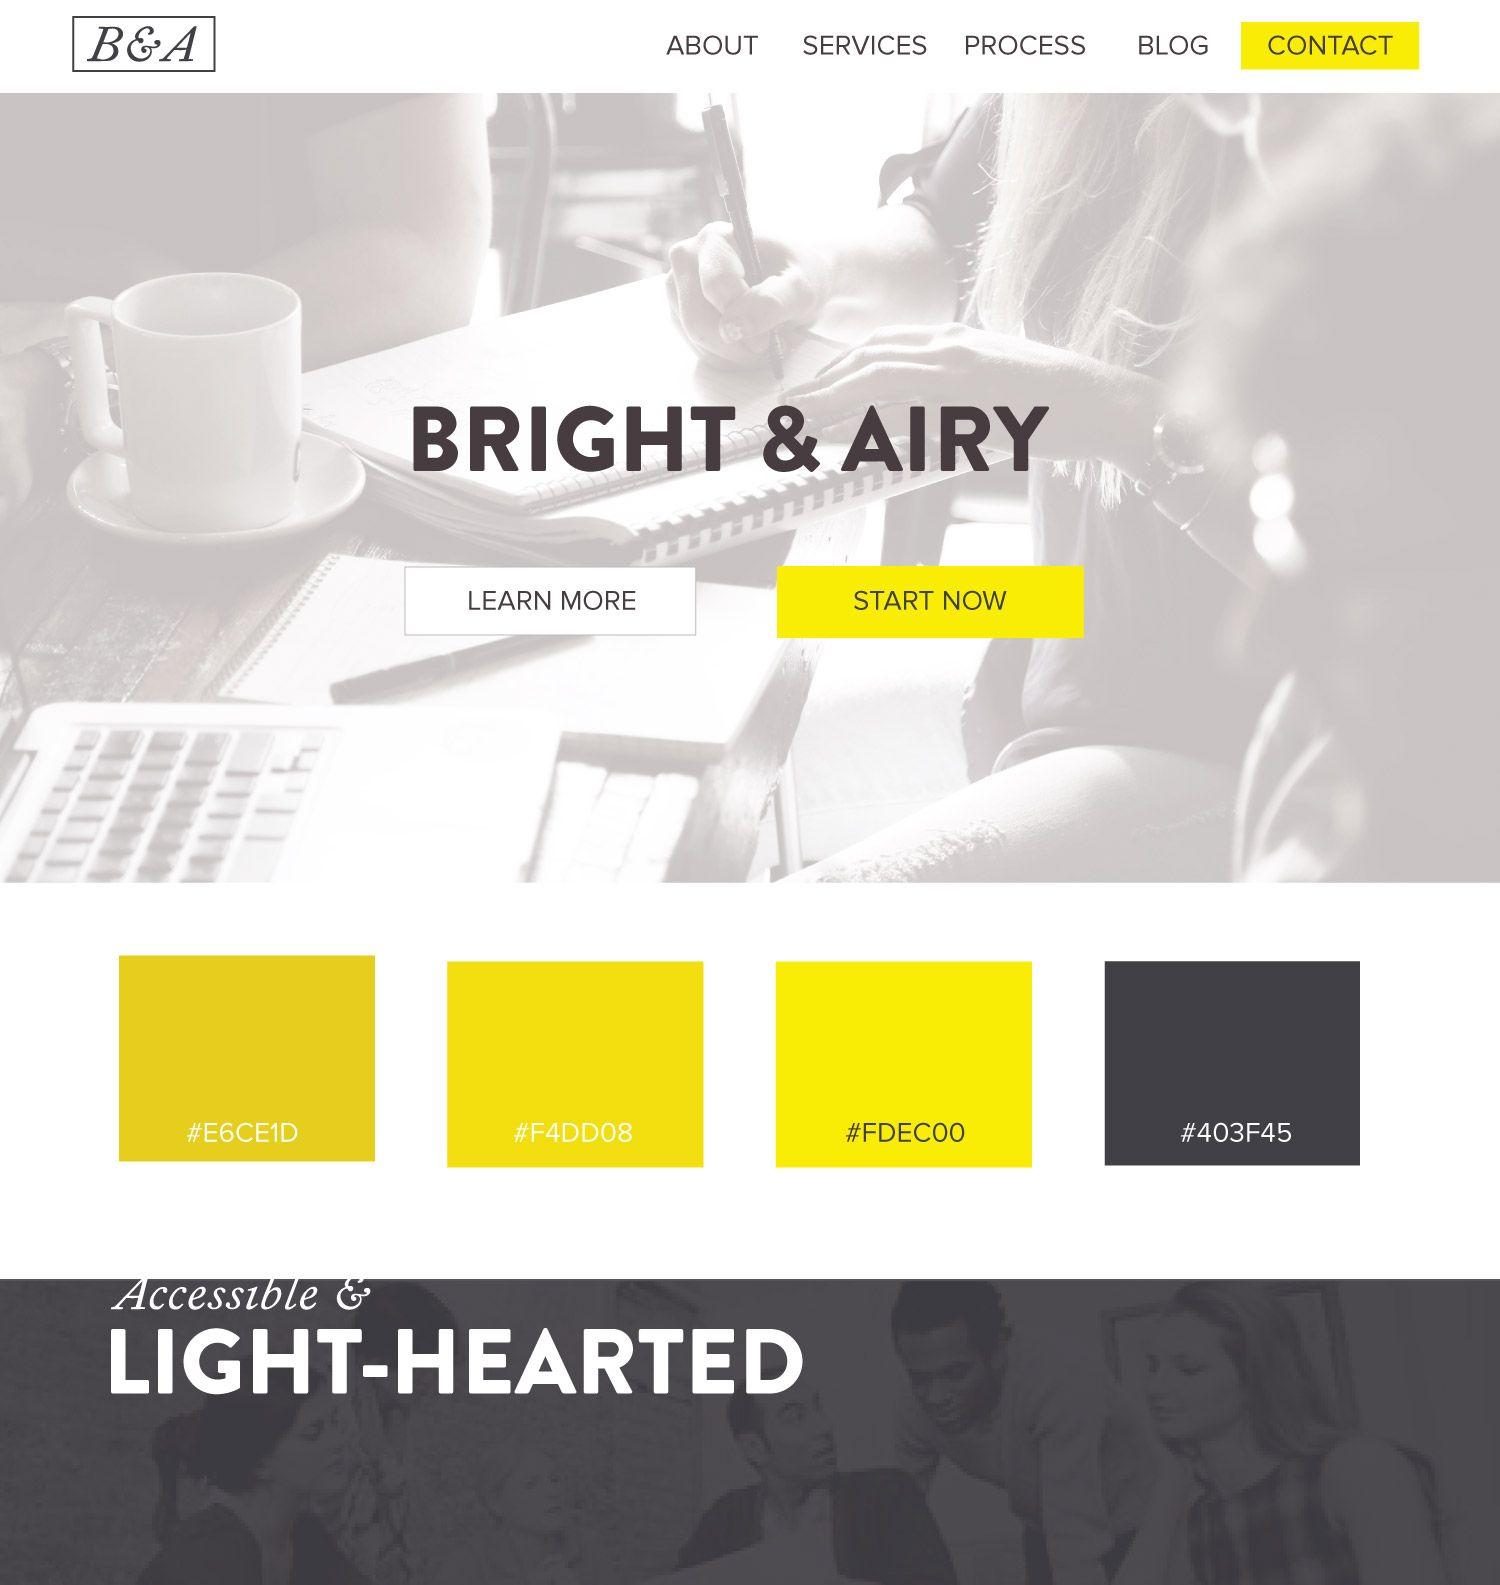 Black White Yello Logo - Web Design Color Palettes. From Black and Gold Websites